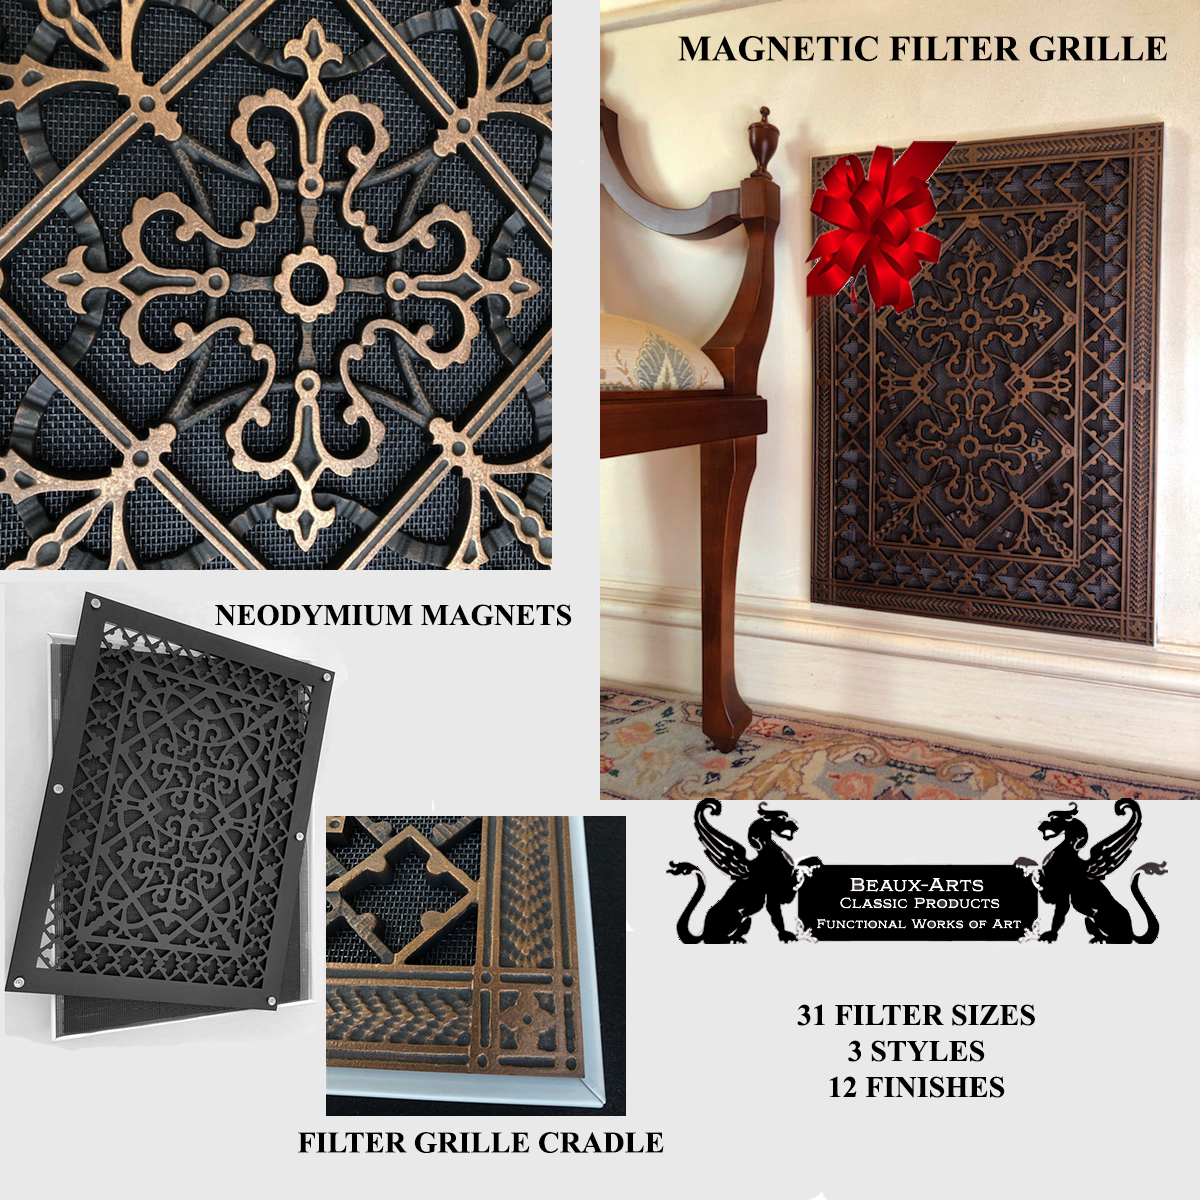 Magnetic Filter Grille Craftsman Style Arts and Crafts in Rubbed Bronze